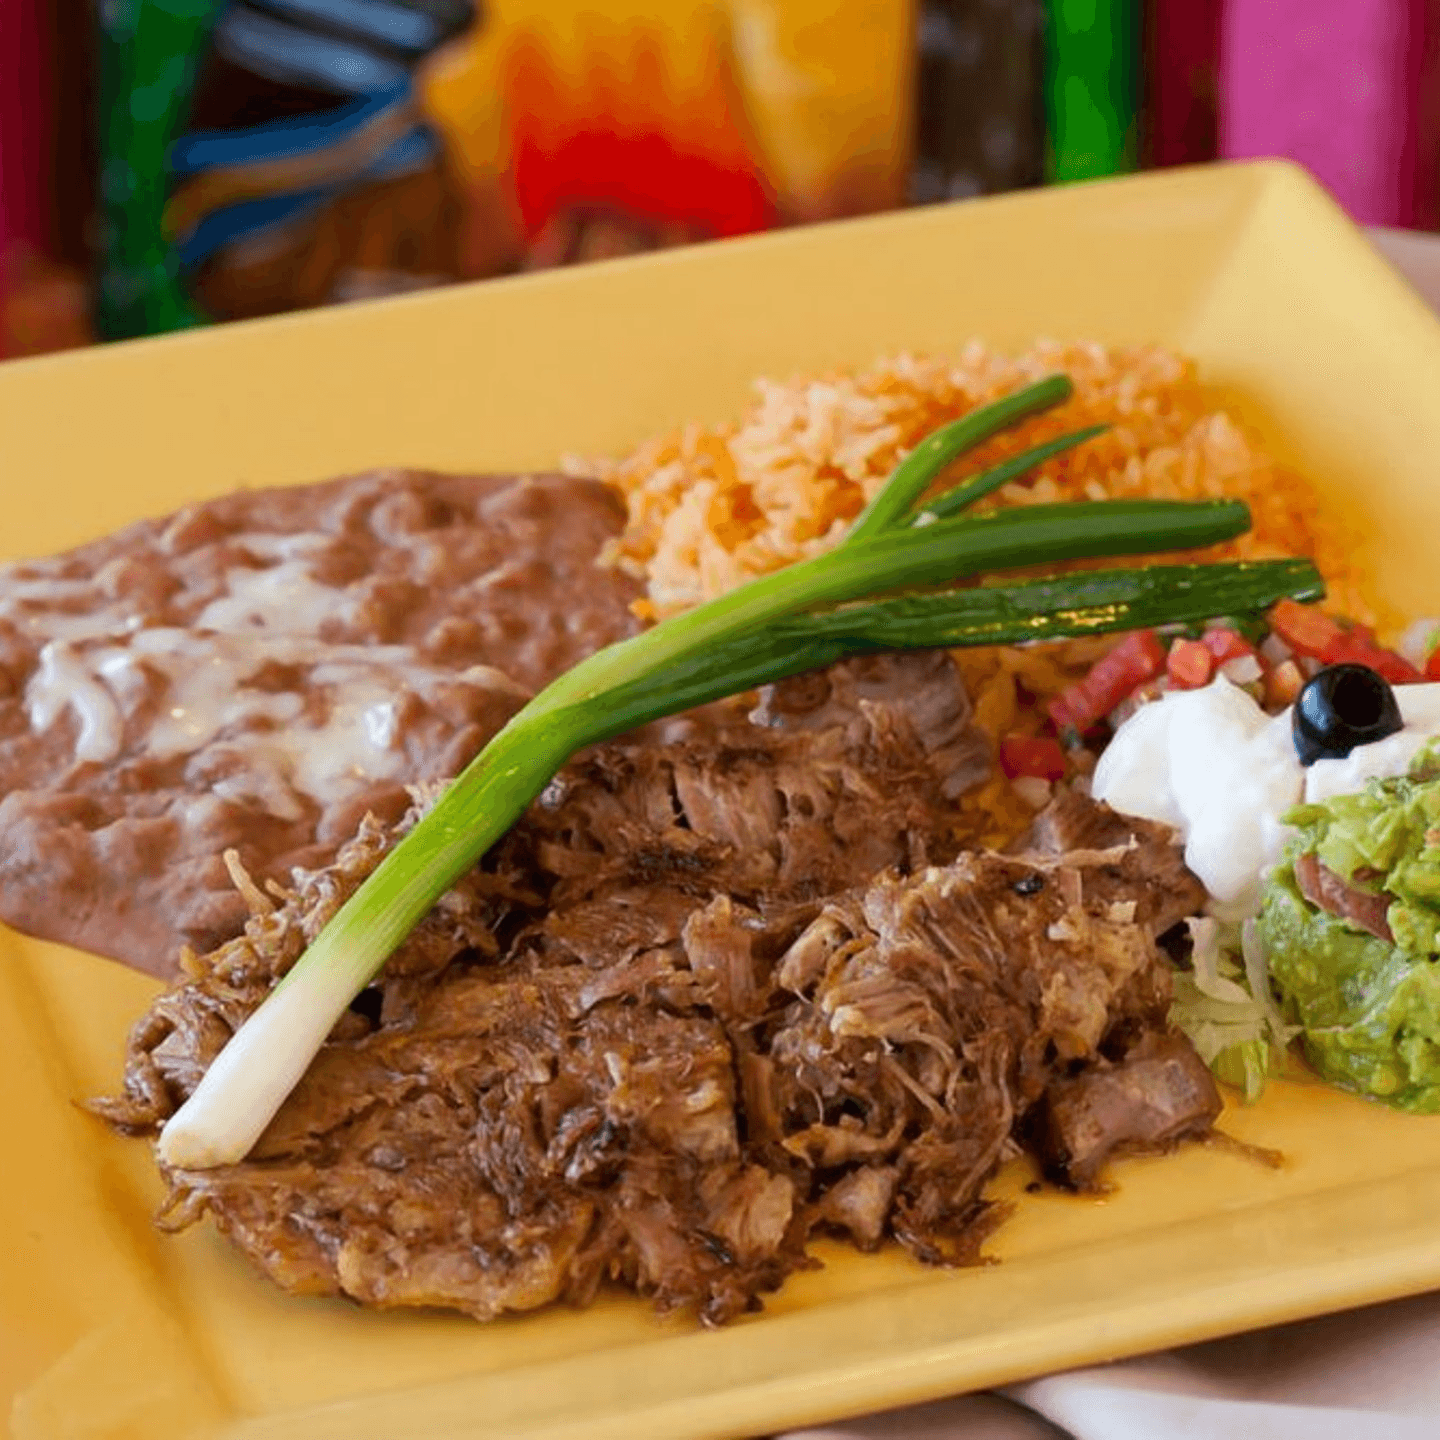  A Fiesta of Flavor on Your Plate!